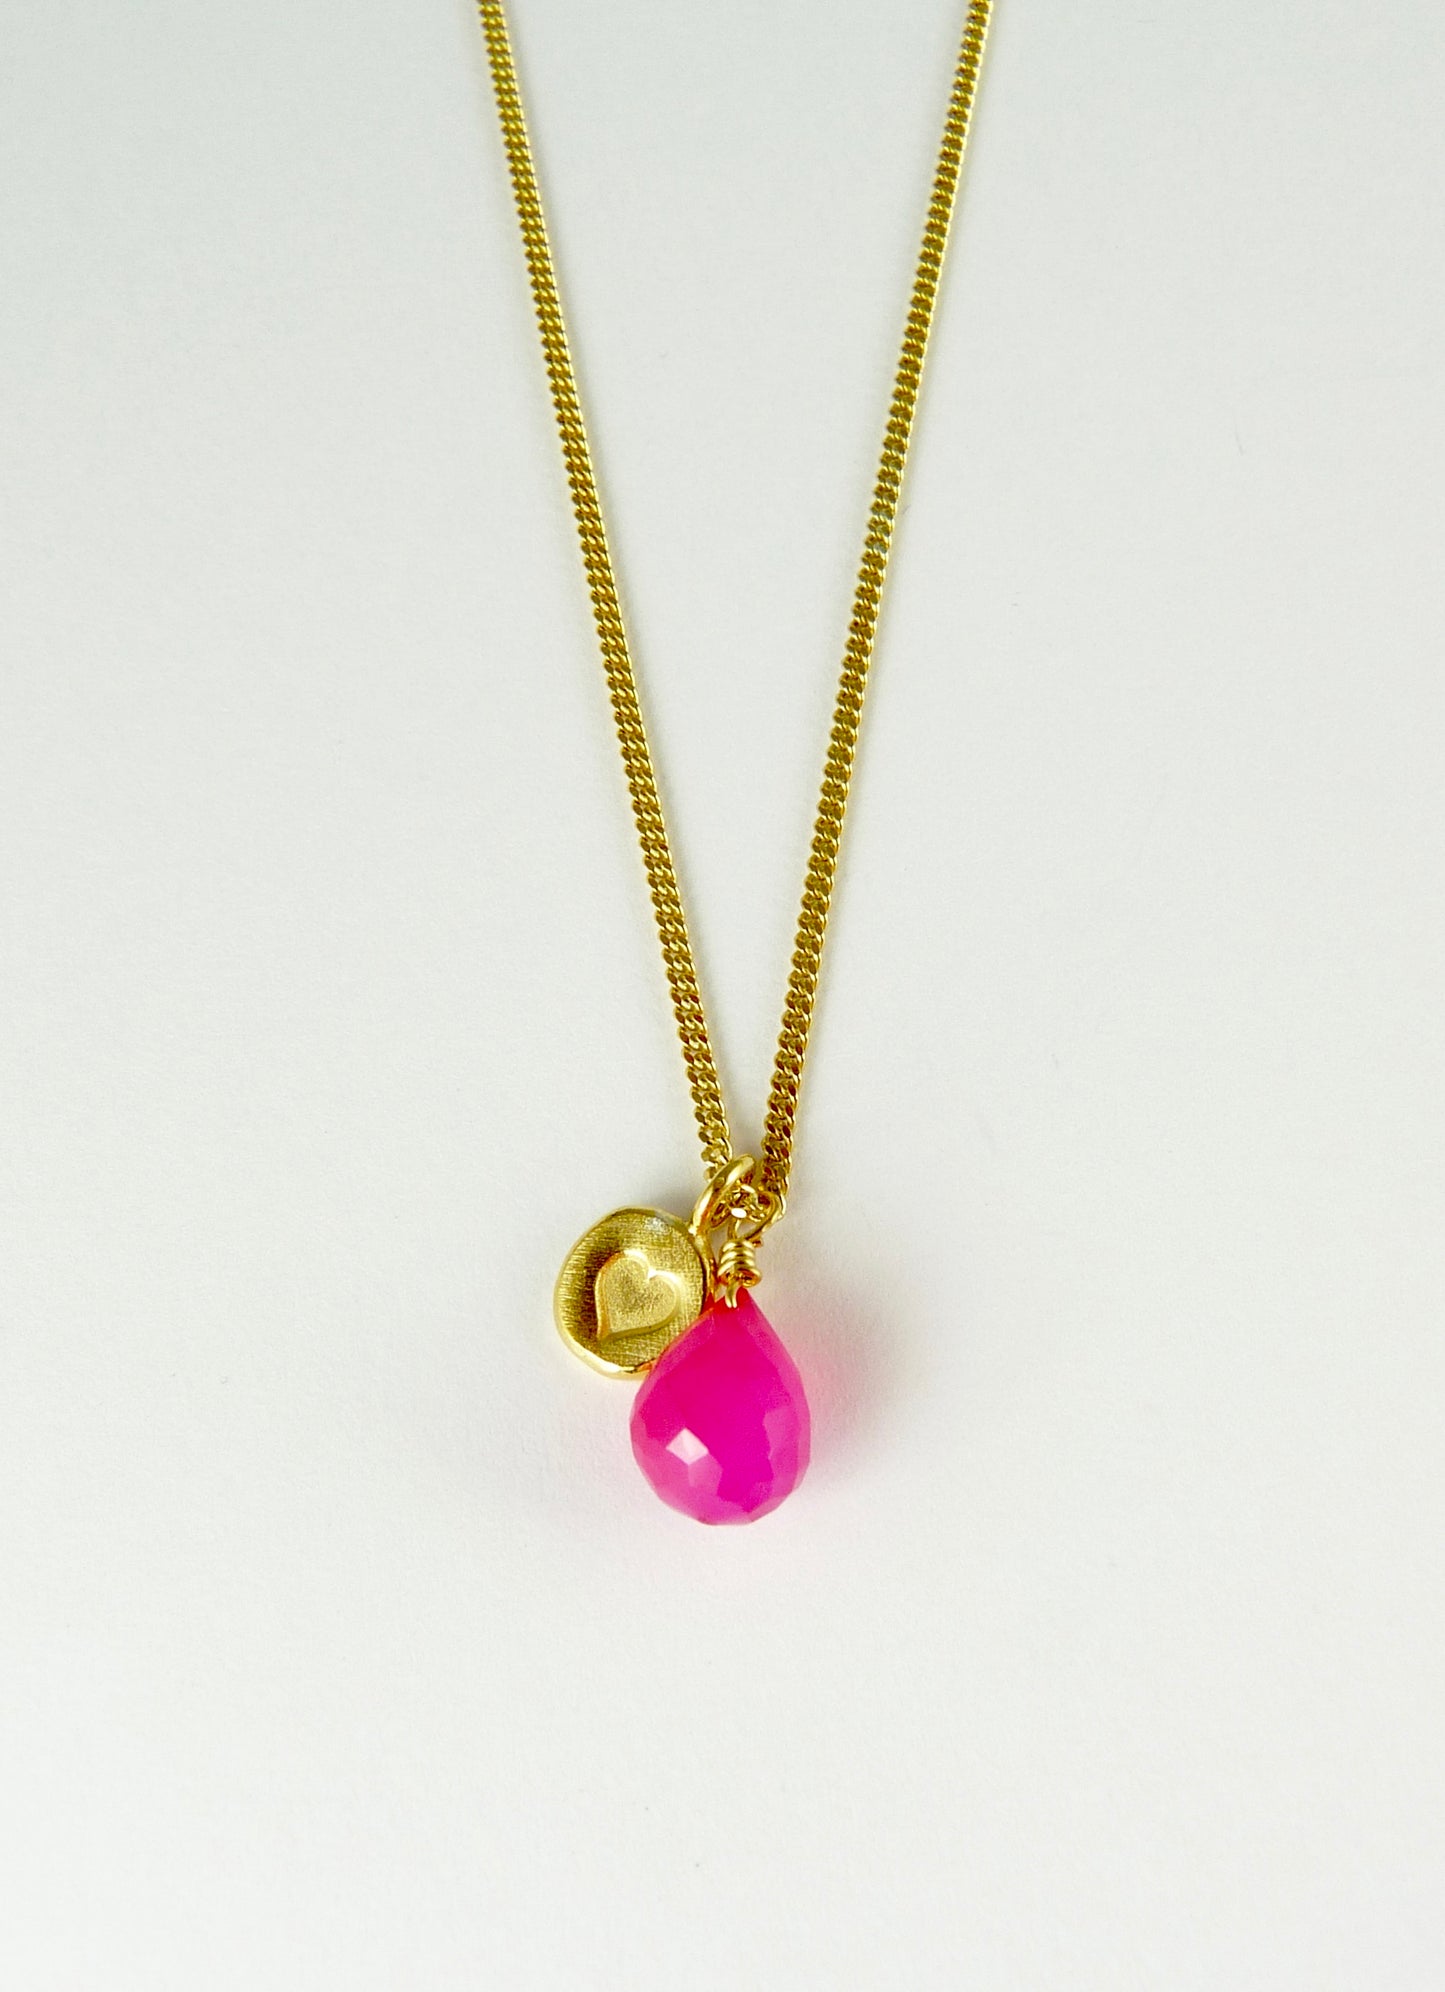 Heart and pink Agate necklace